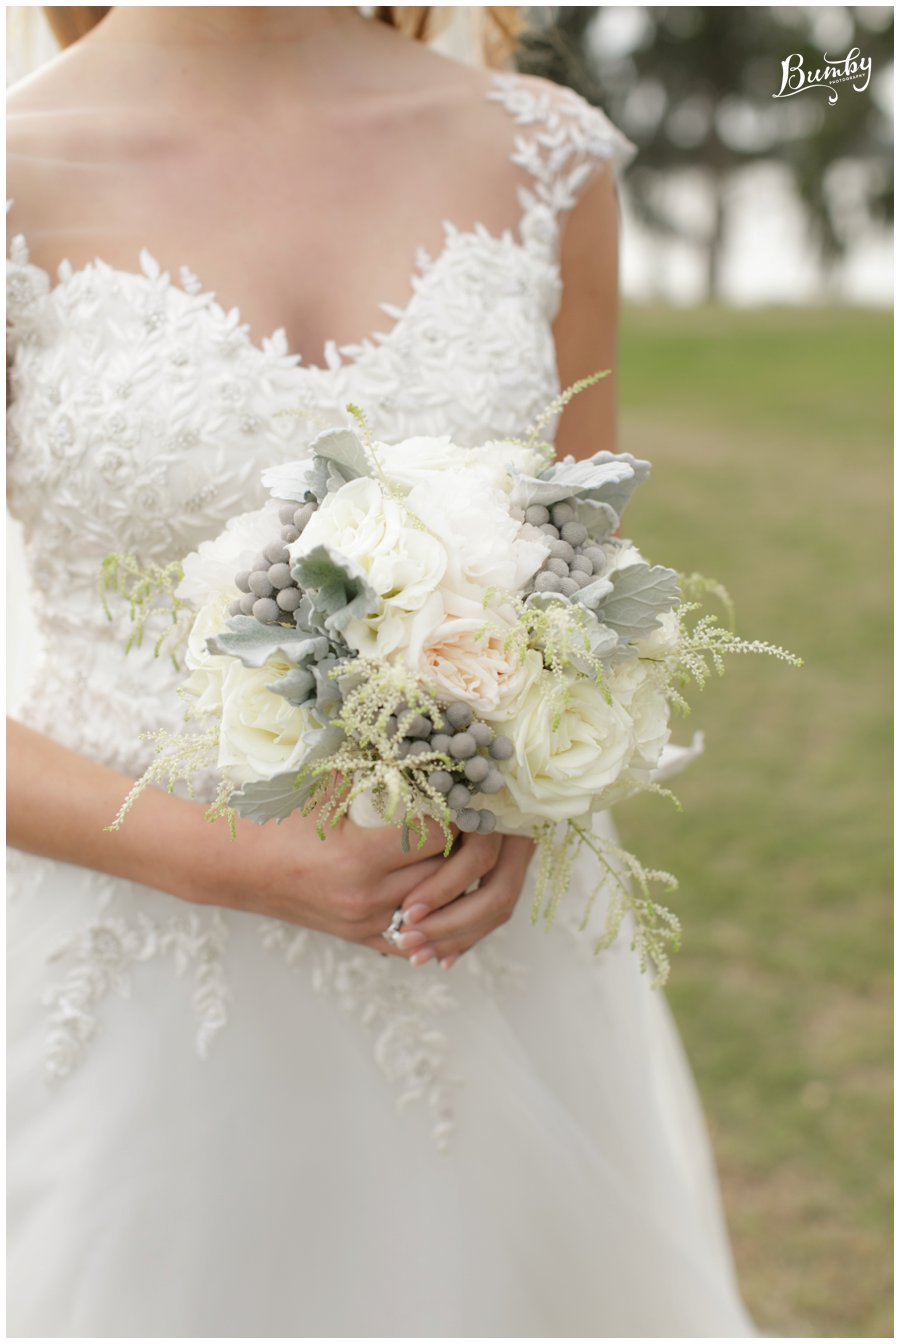 Warm_Cozy_Winter_Rustic_Wedding_Bouquet_Bumby_Photography_Floral_Friday_0025